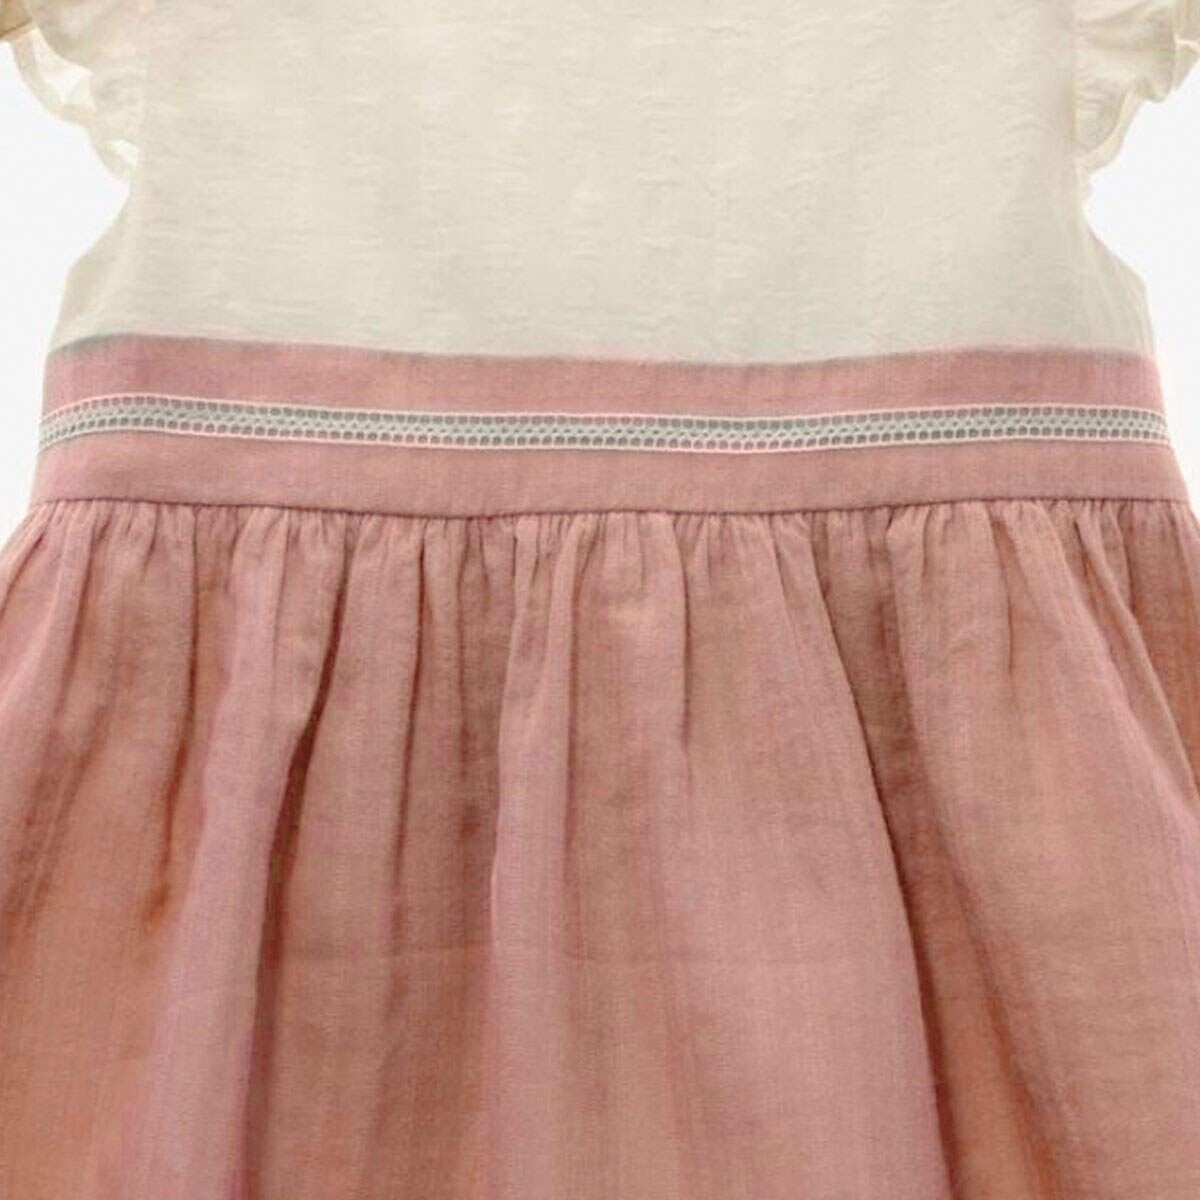 DRESS WITH BOW AT THE BACK PINK DELSUR - 2